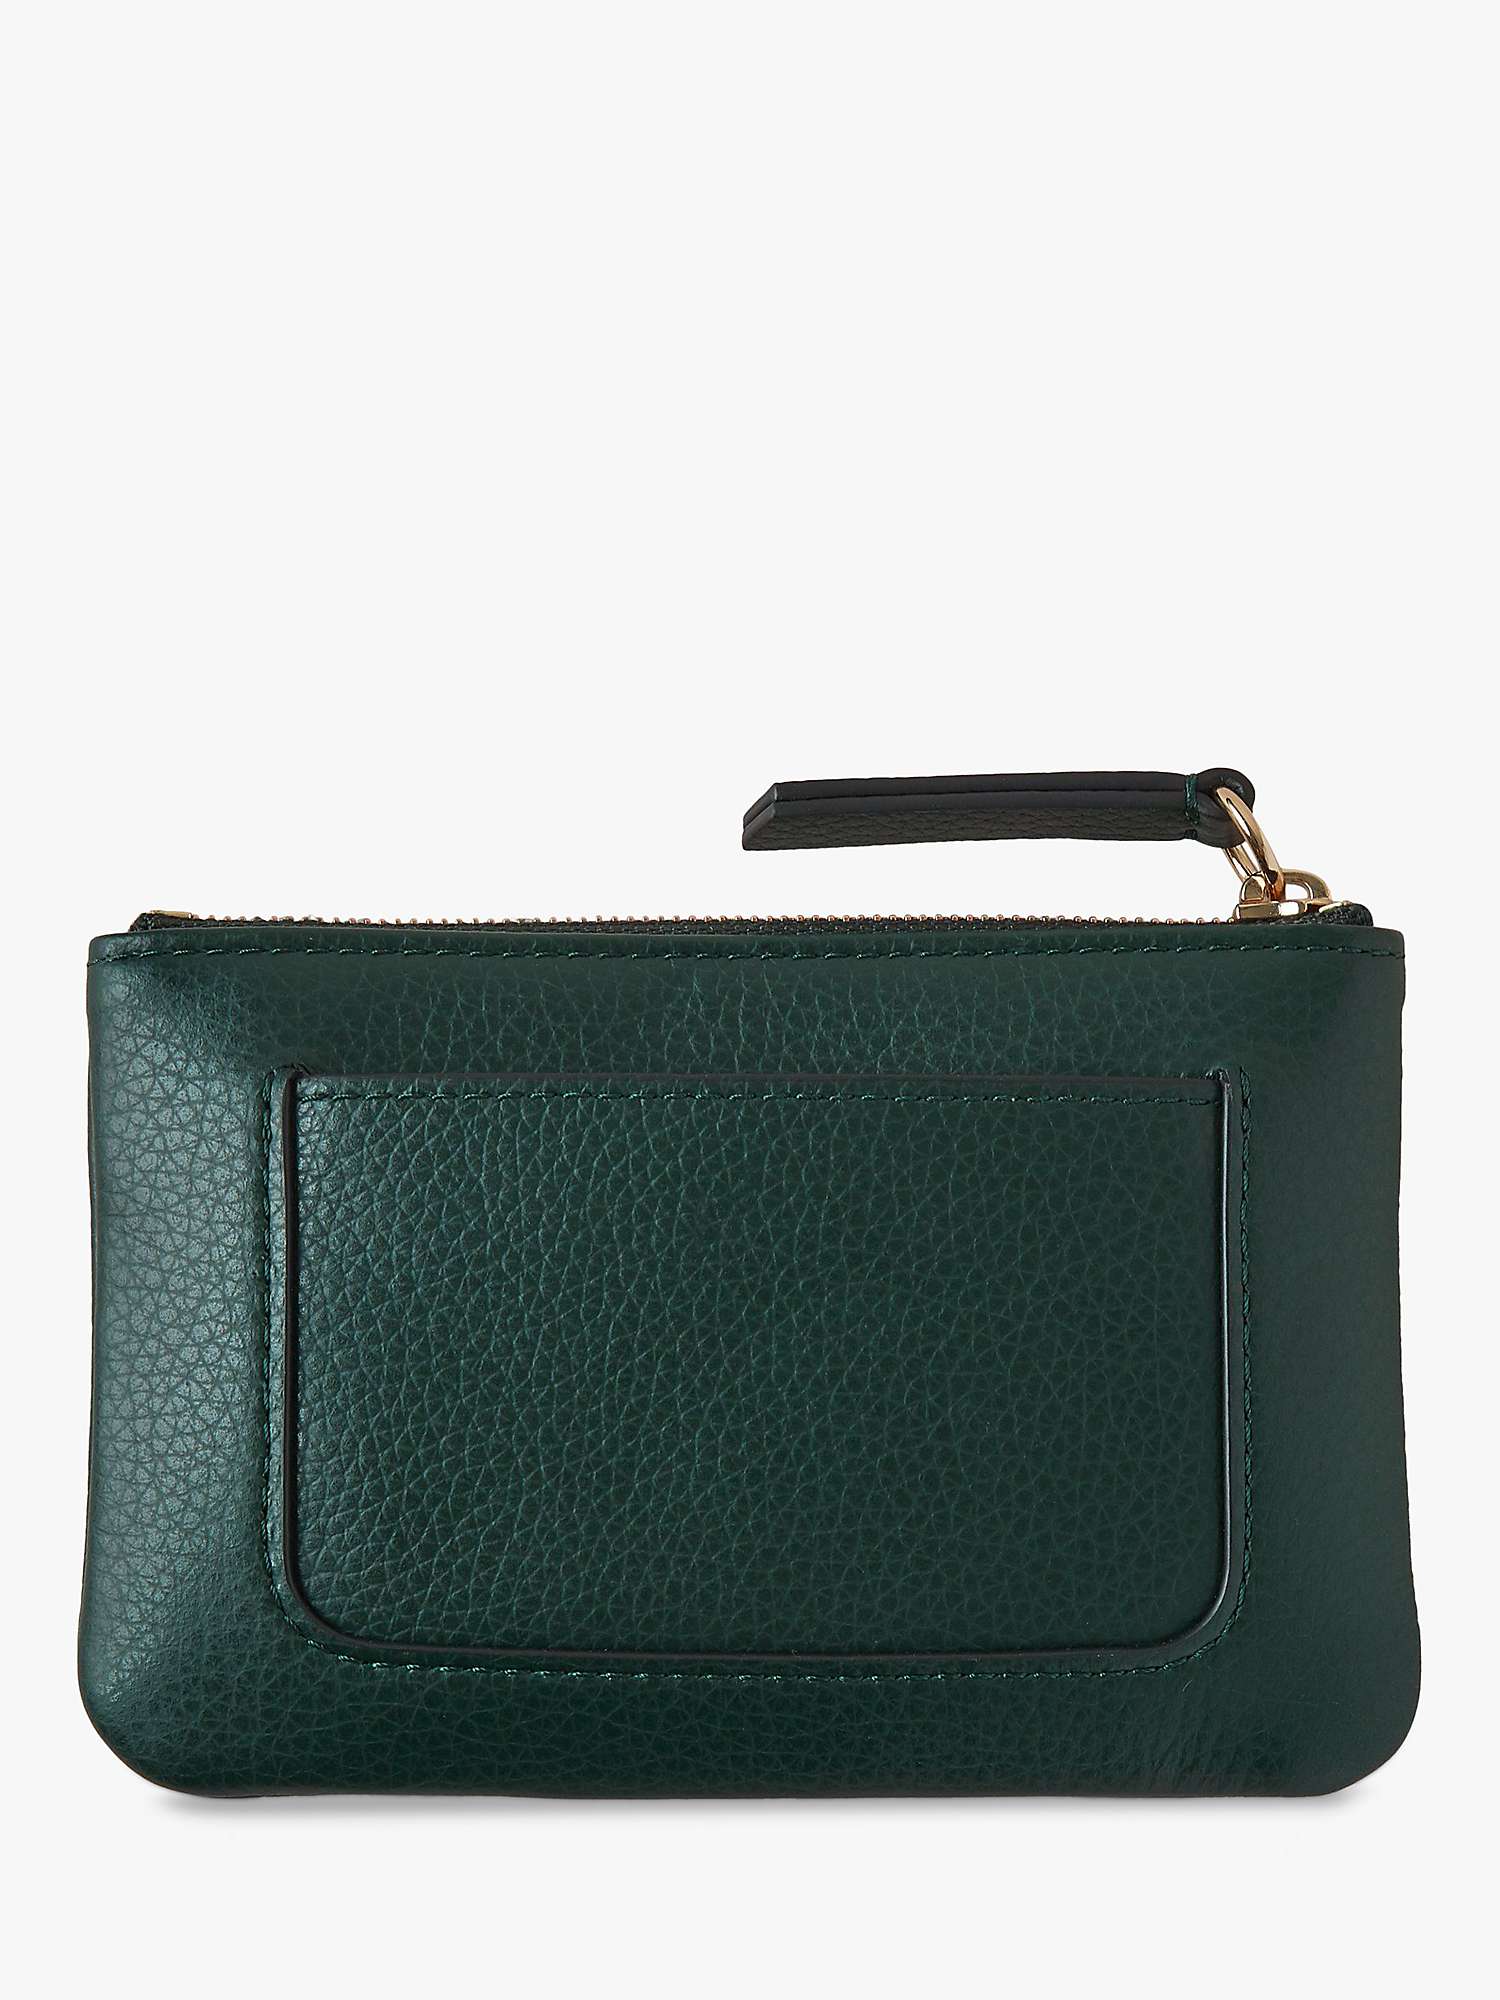 Buy Mulberry Plaque Small Classic Grain Leather Zip Coin Pouch Online at johnlewis.com